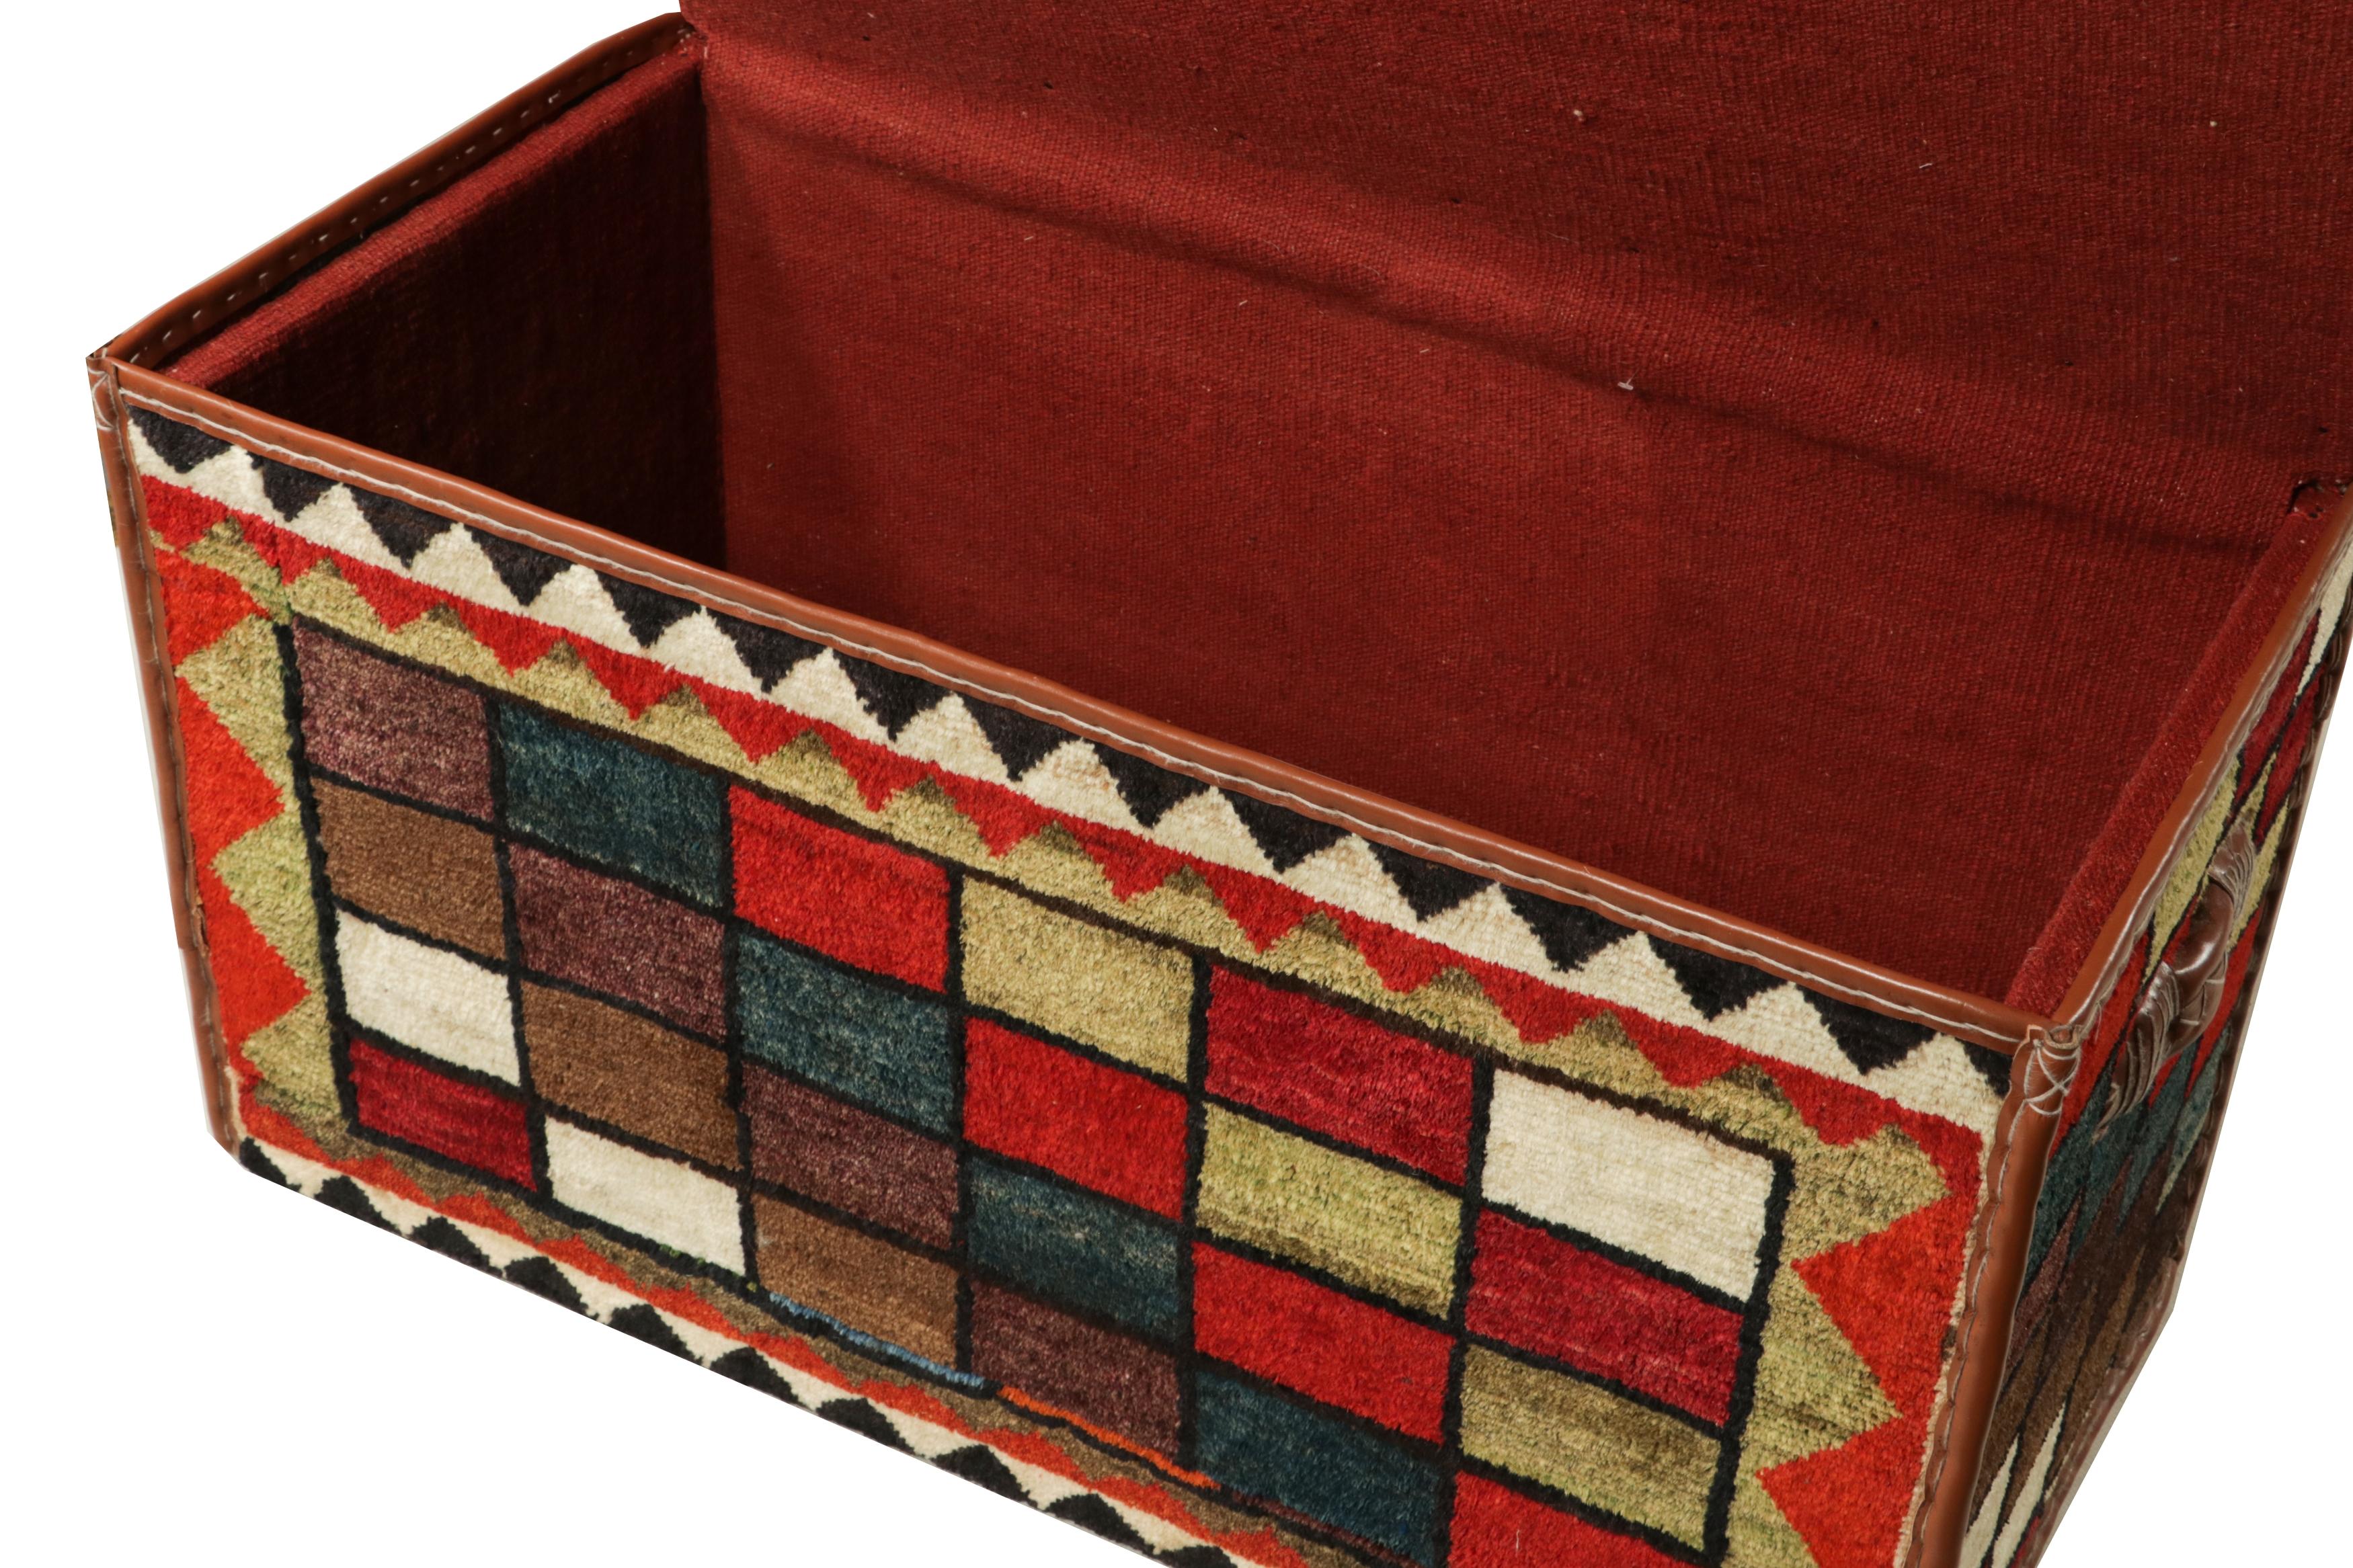 Leather Rug & Kilim’s Persian Tribal Storage Chest with Colorful Geometric Patterns For Sale